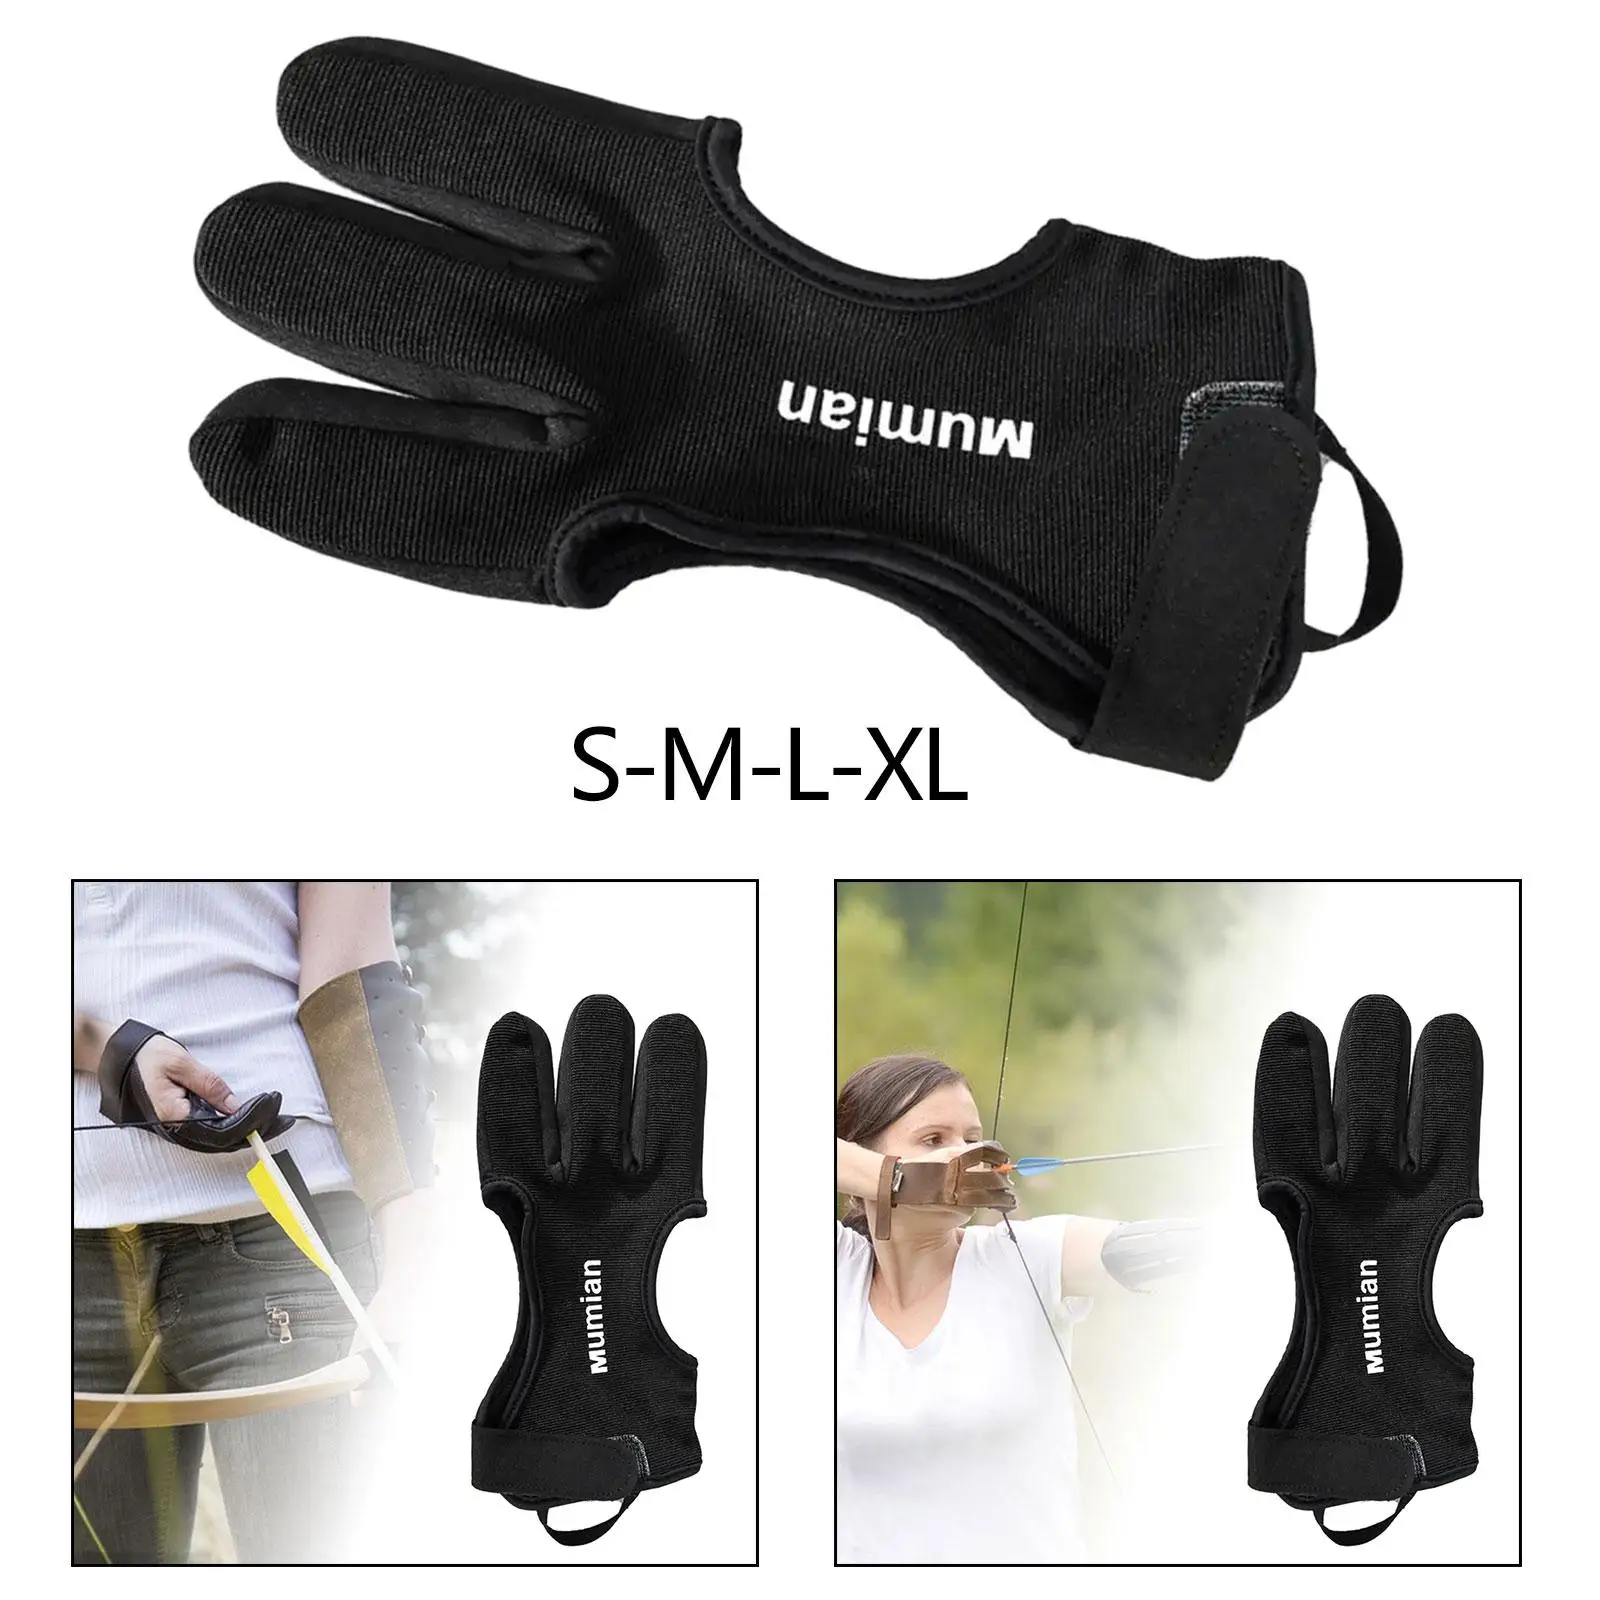 Archery Glove Breathable for Left and Right Hand Nonslip Padded Tips Archery Finger Guard for Men Women Adult Archery Practice